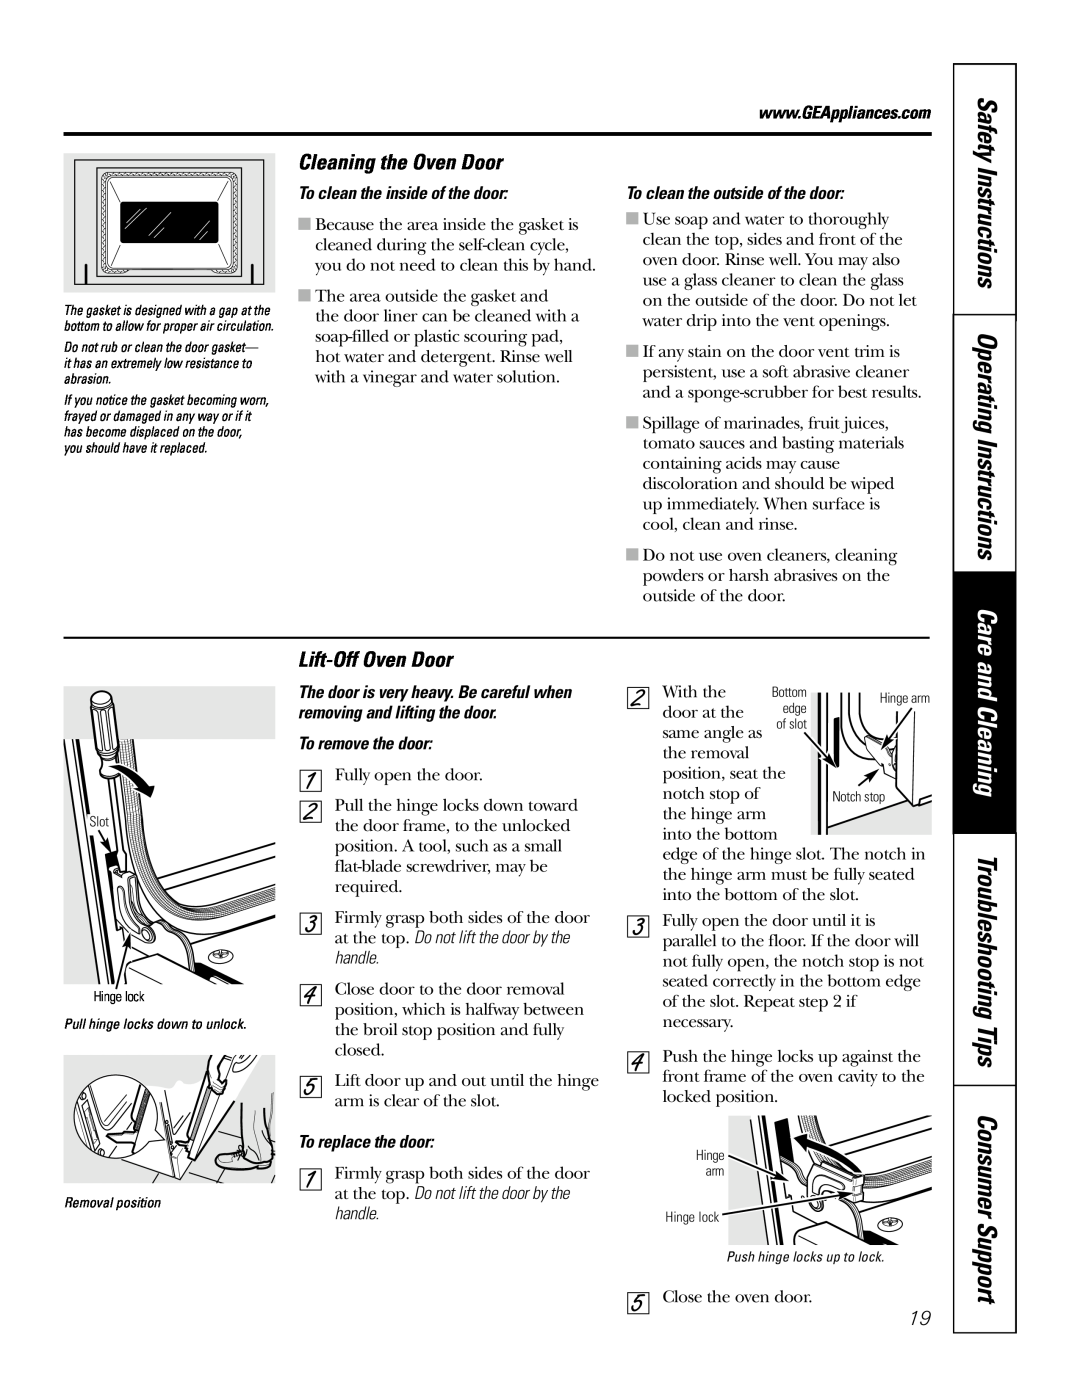 GE JDP39 Cleaning Troubleshooting Tips Consumer, Instructions Operating Instructions Care, Cleaning the Oven Door, Support 